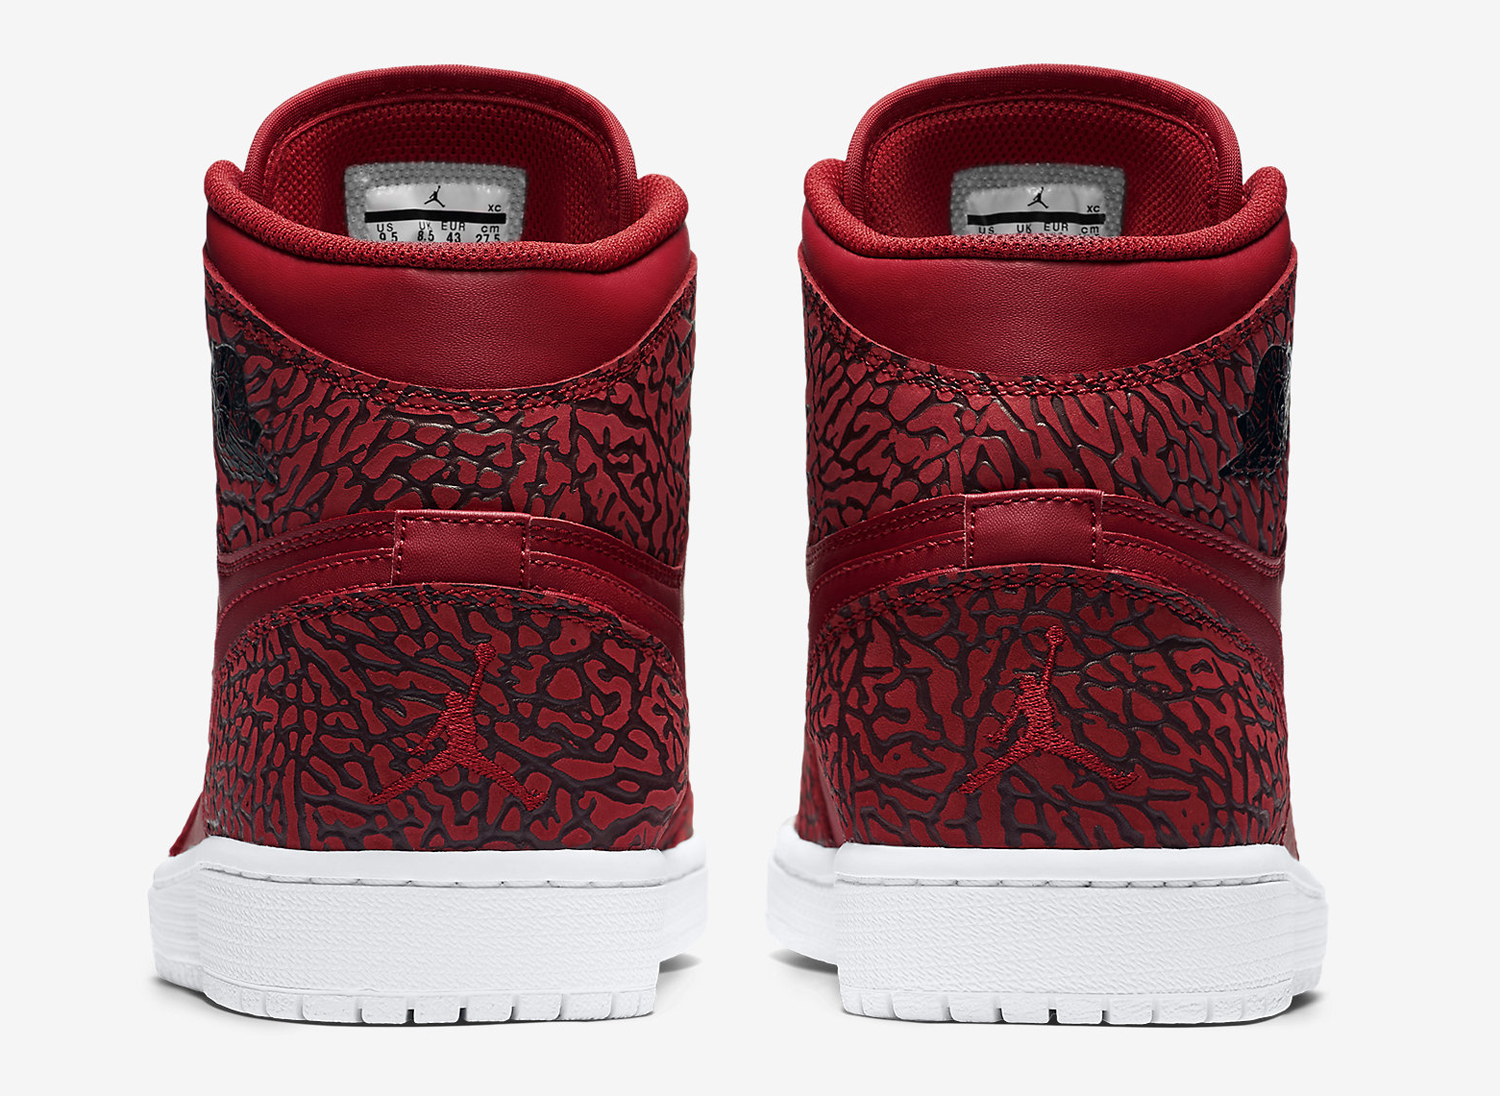 Air Jordan 1s Get Covered in Elephant Print | Sole Collector